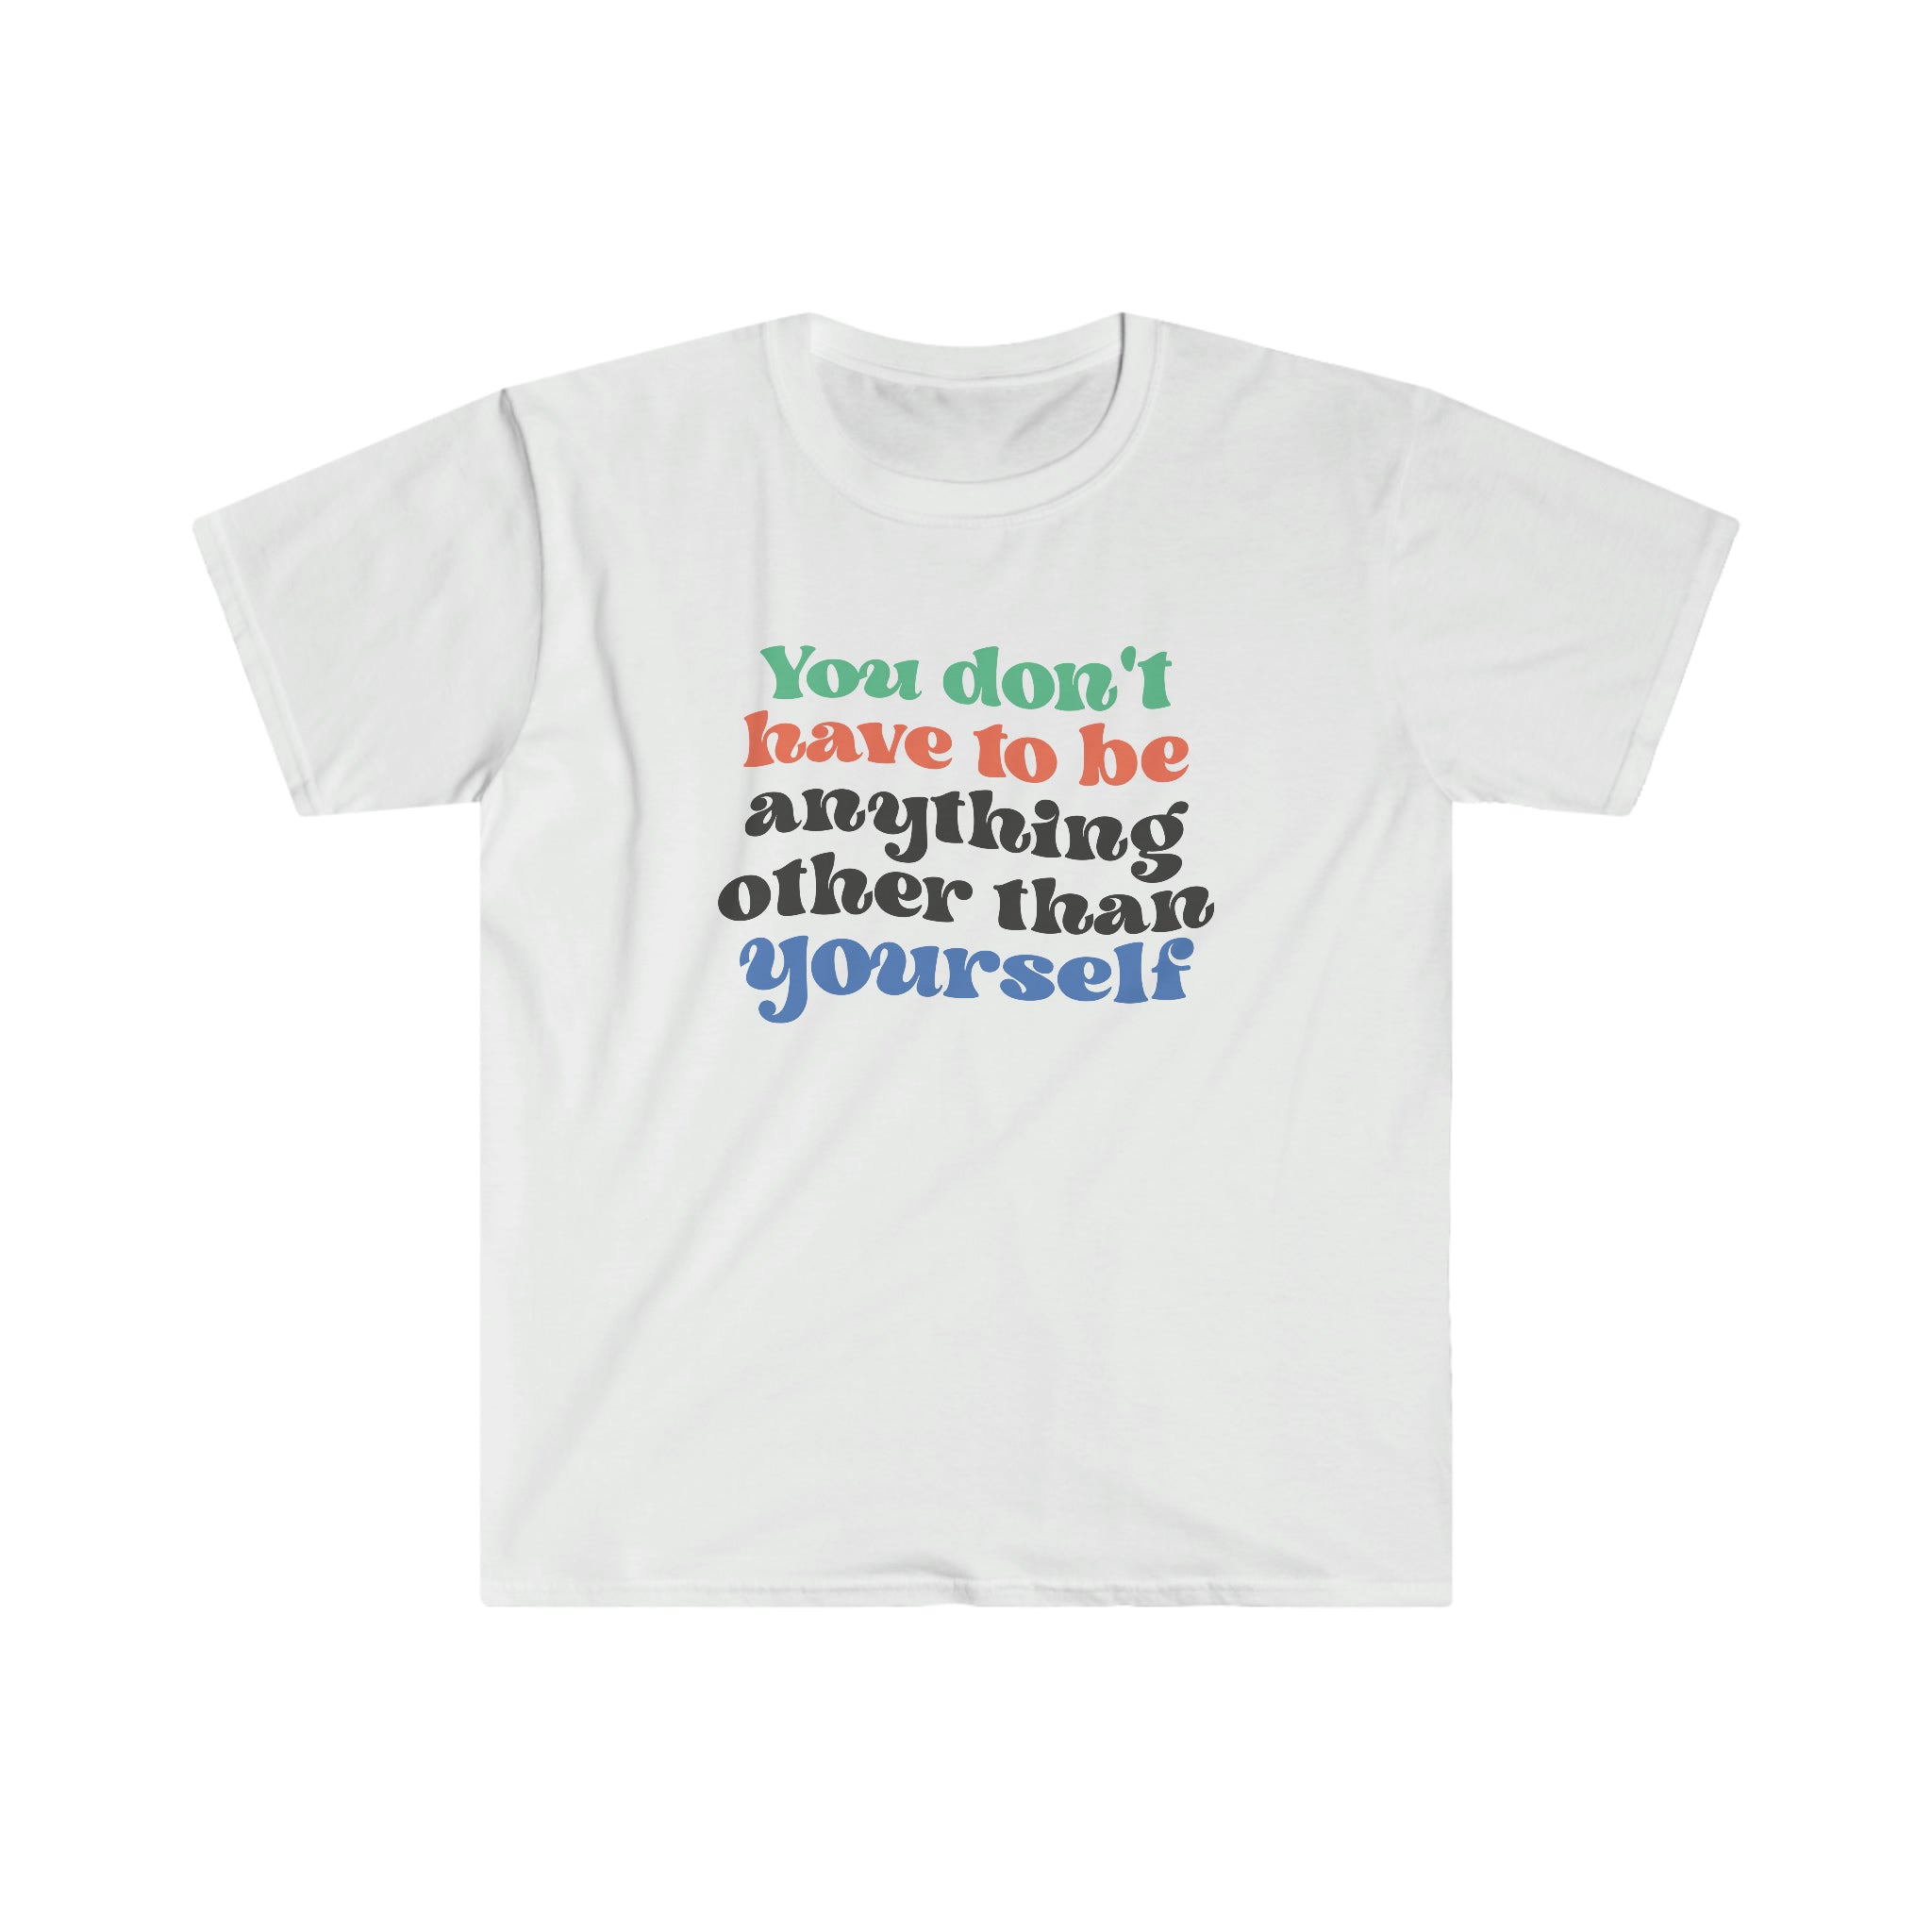 This brand new You Don't Have To Be Other Than Yourself tee shirt is of top quality and guarantees that you won't find a better option to express yourself than with this trendy item.